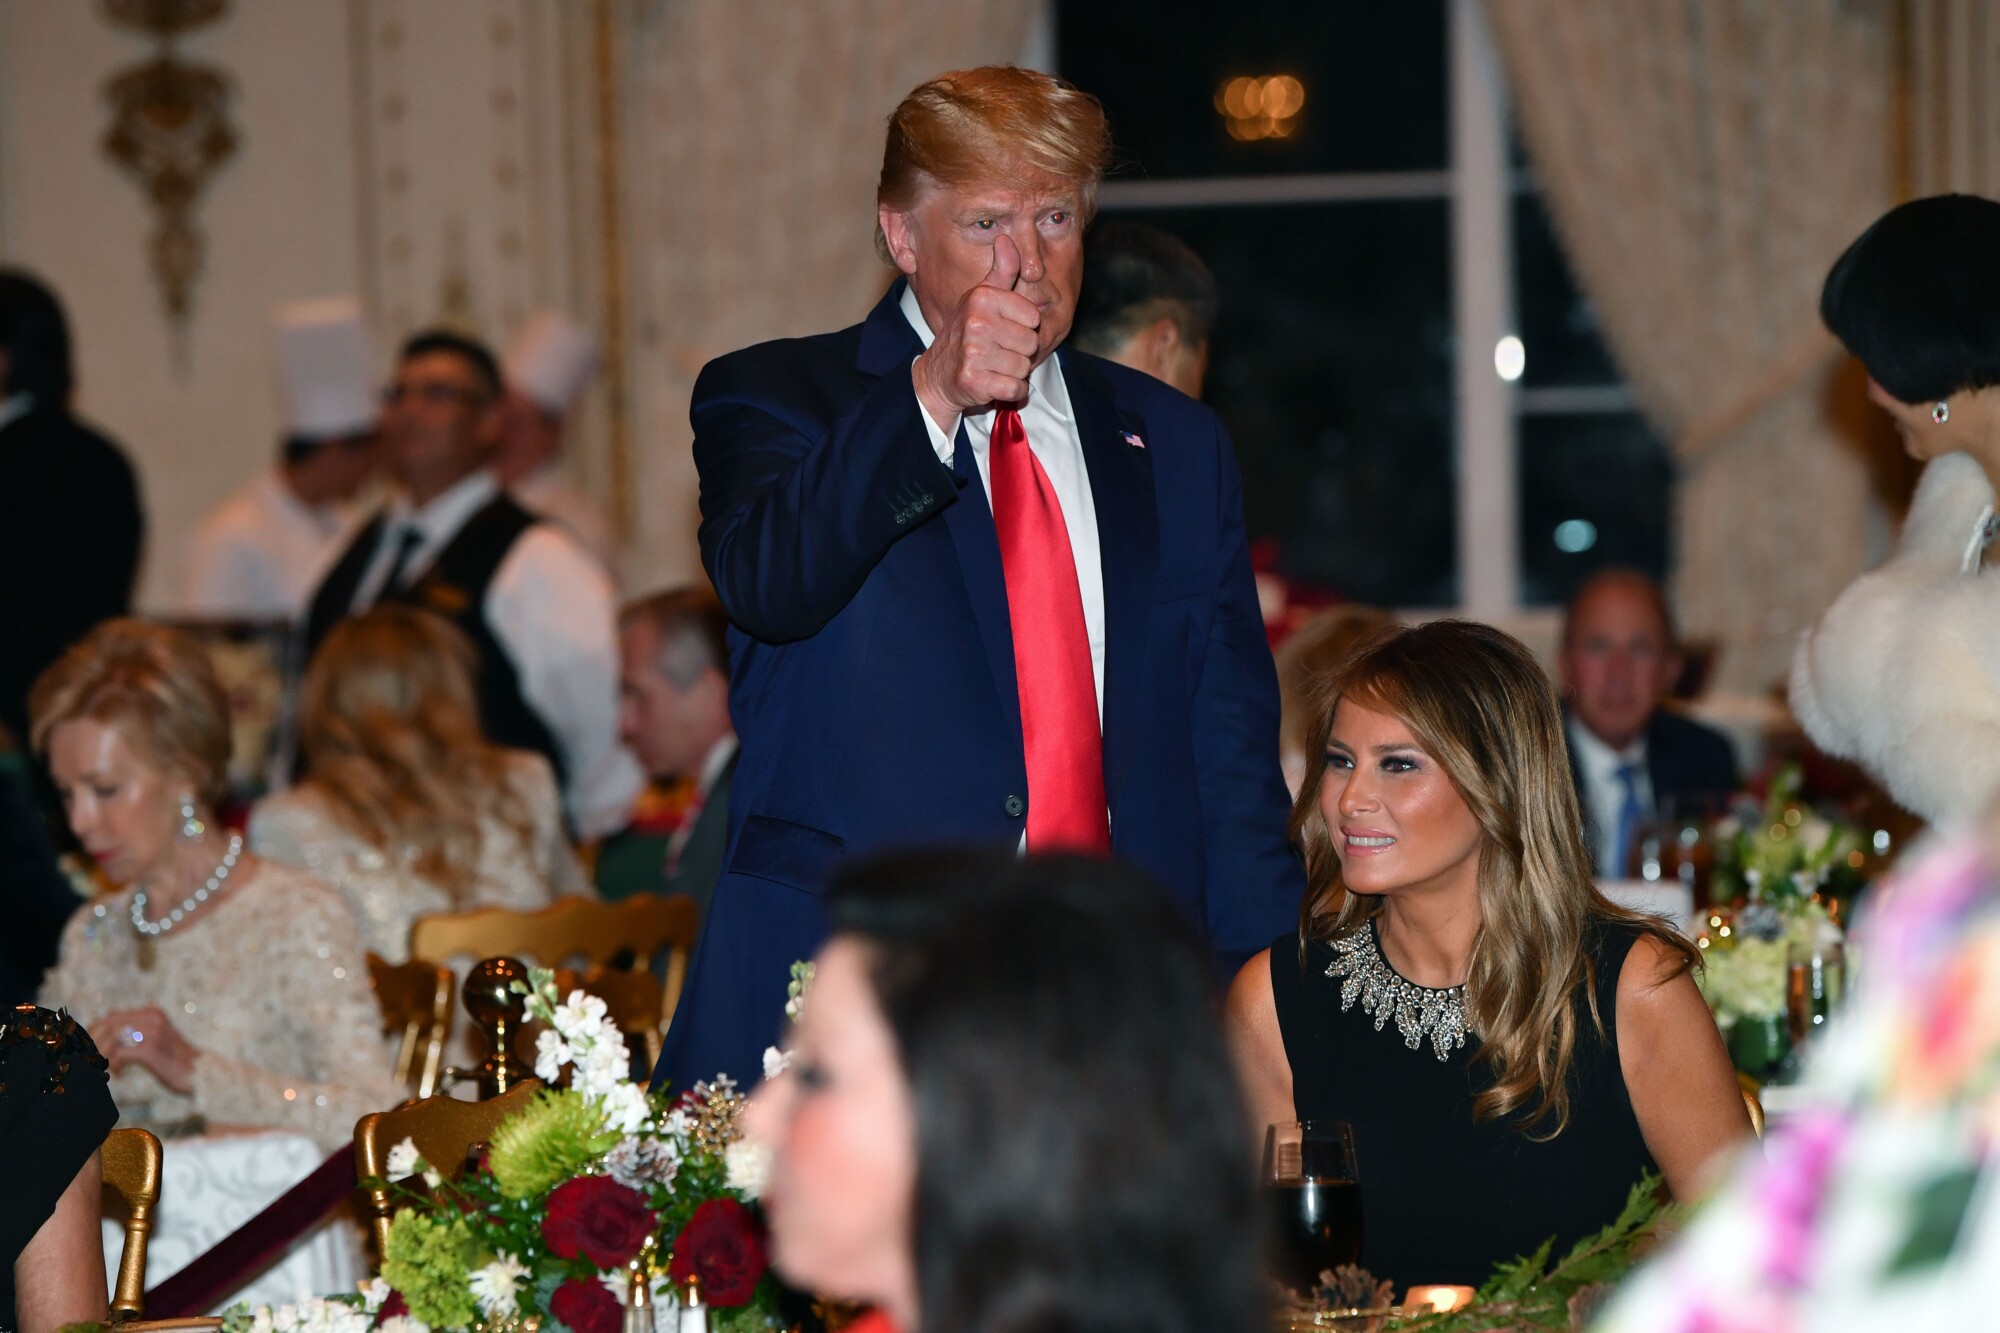 Palm Beach Town Attorney Sides With Trump in Mar-a-Lago Residency Controversy